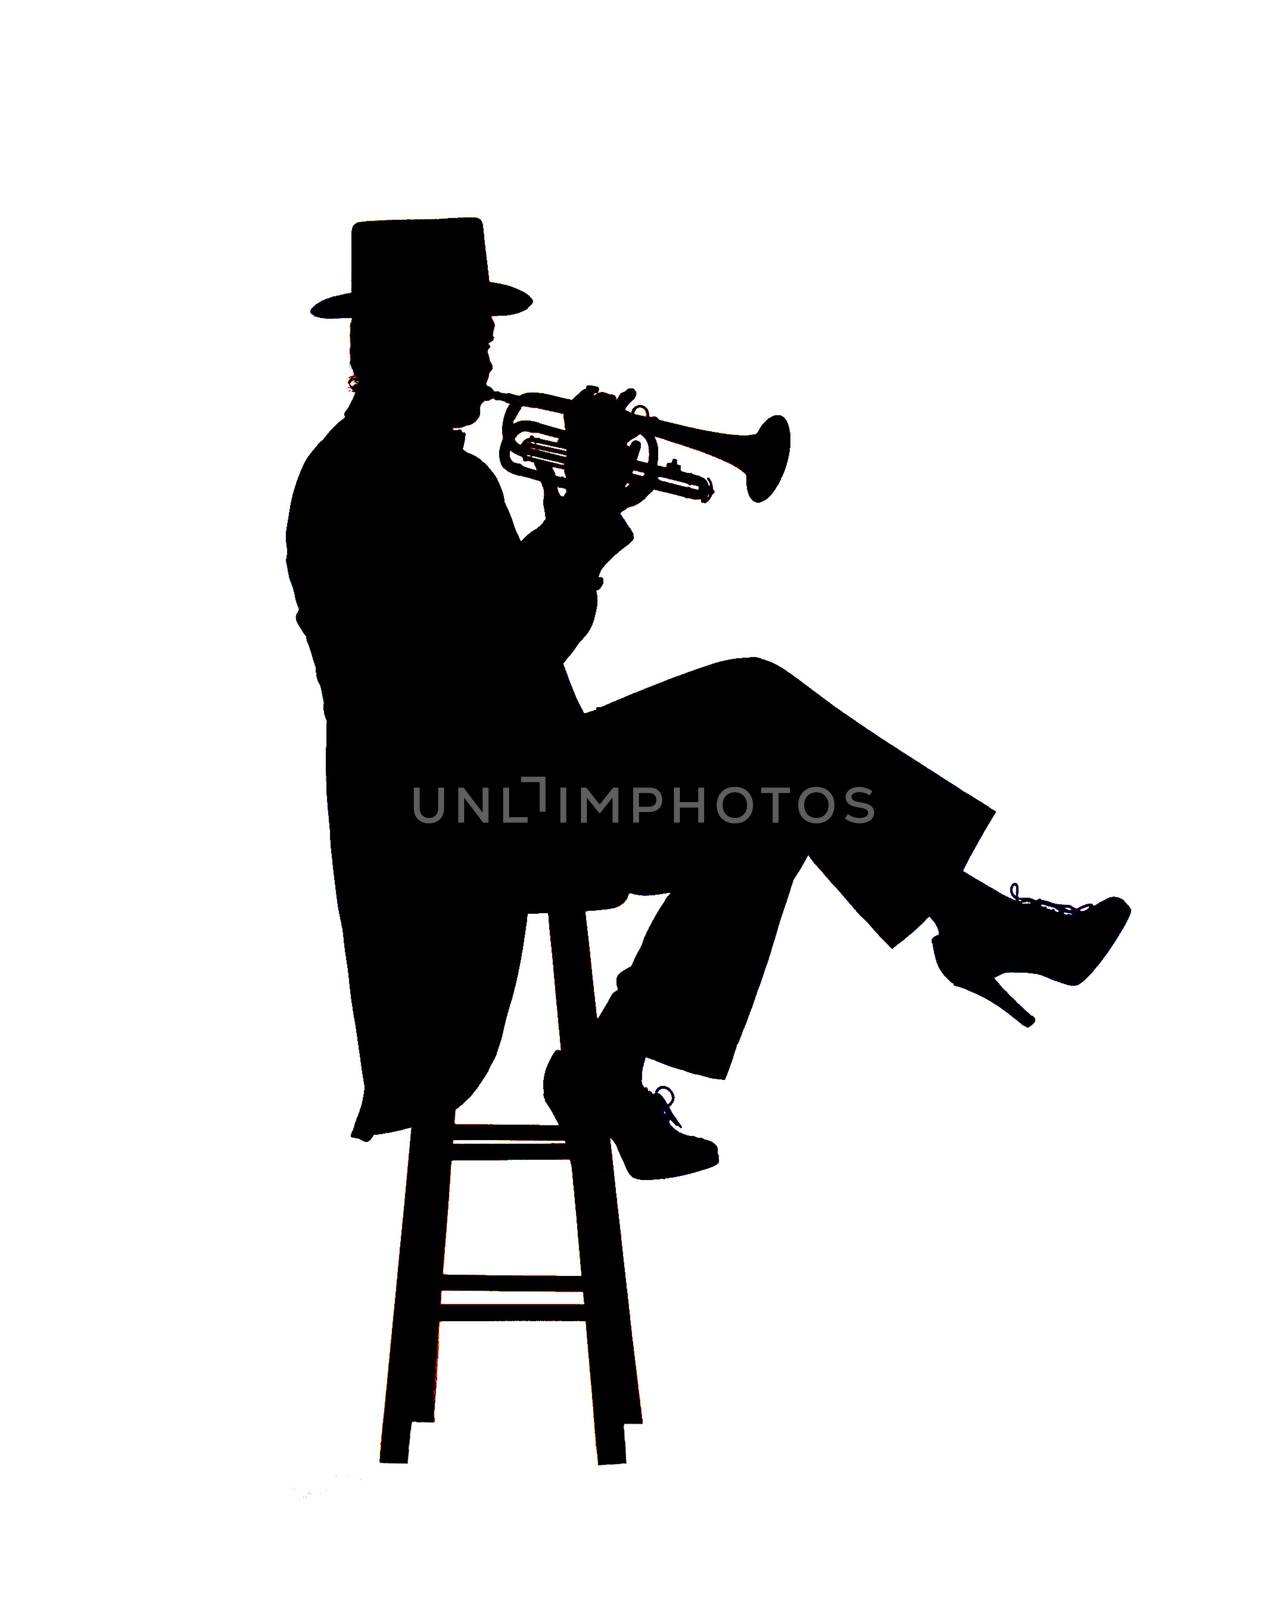 Silhouette image of a woman trumpet player by rcarner